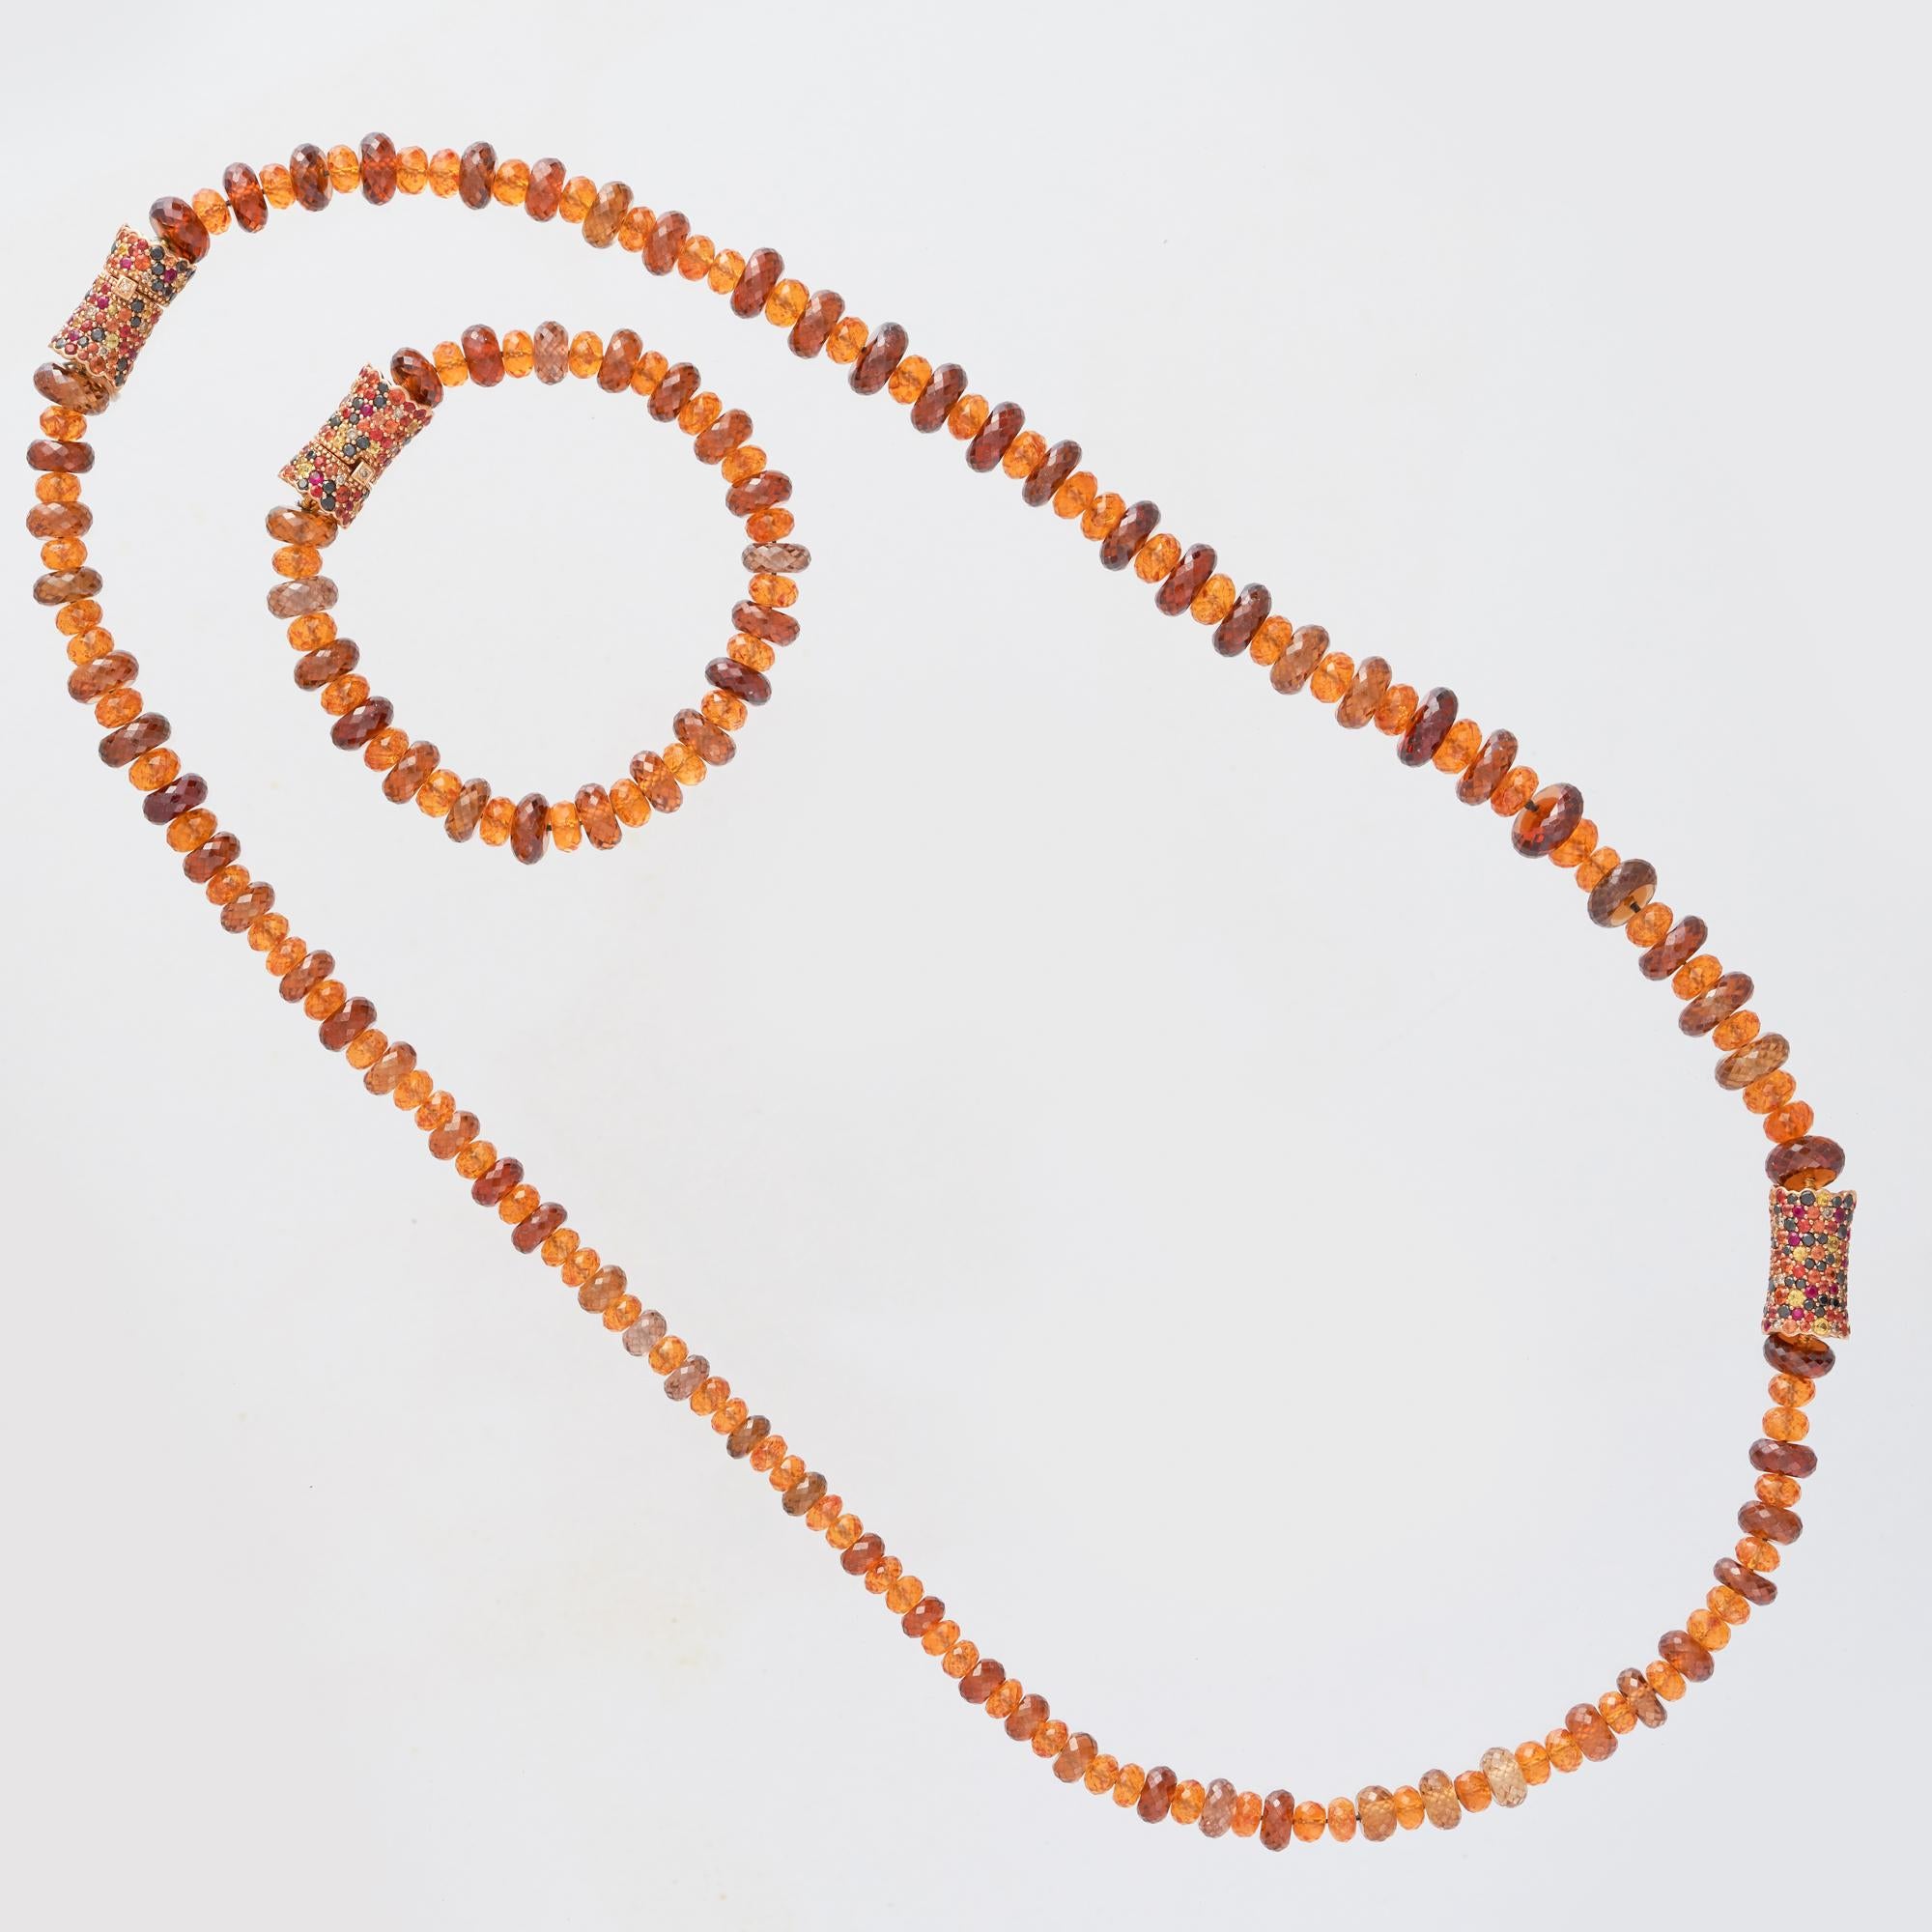 Margot McKinney 18 karat Rose Gold Garnet and Zircon bead Necklace features three gem set Rondelles, two of which are clasp set to form a detachable bracelet. The necklace is set with 101 Garnet beads 165.00 carat, 85 Zircon beads 370.00 carat, 131